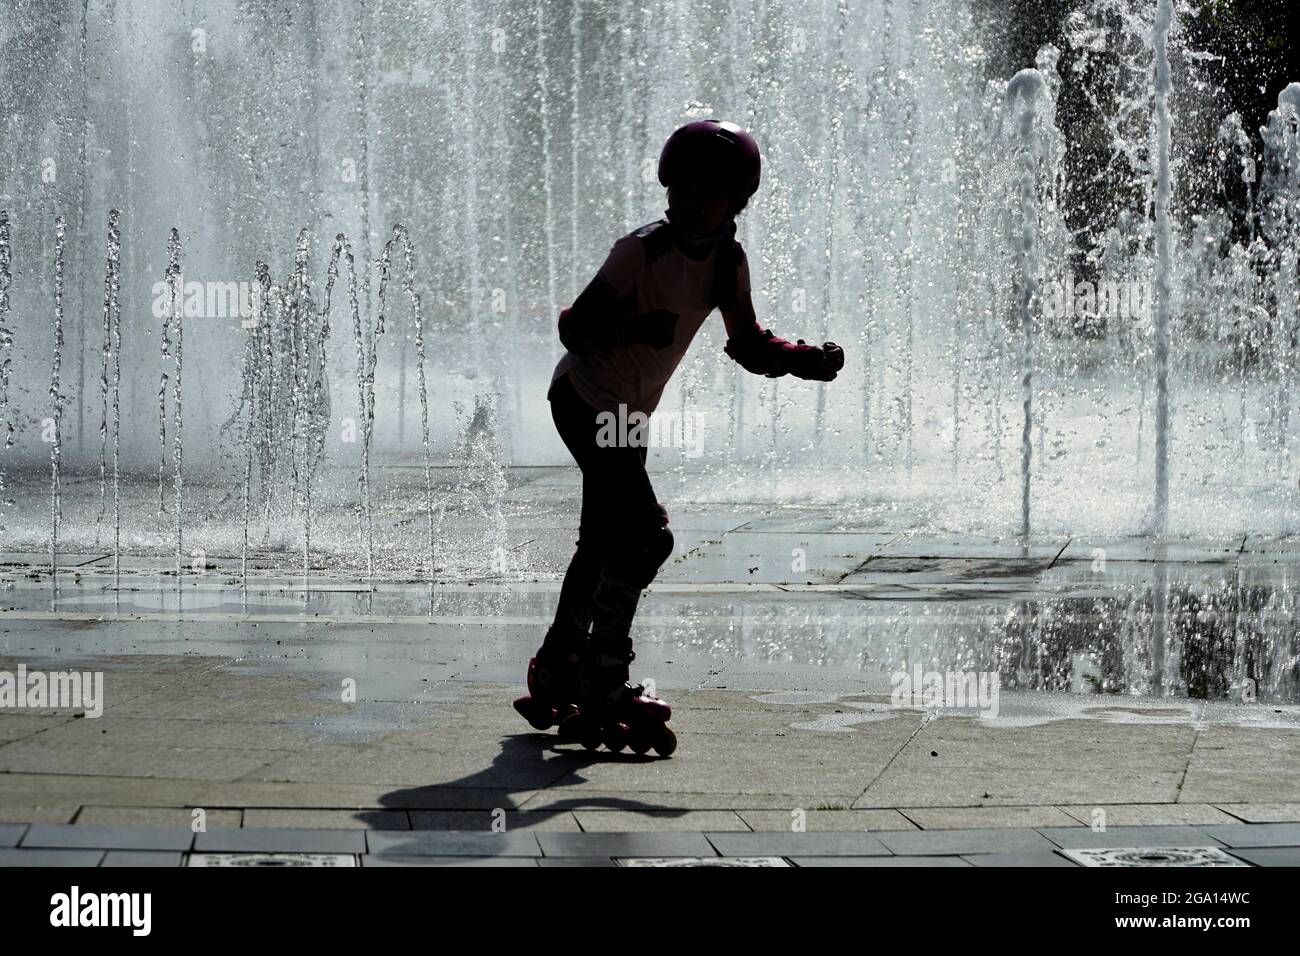 Silhouette of little girl on roller skating cool off in the park under water sprinklers set up to beat the oppressive summer heat in Istanbul, Turkey Stock Photo